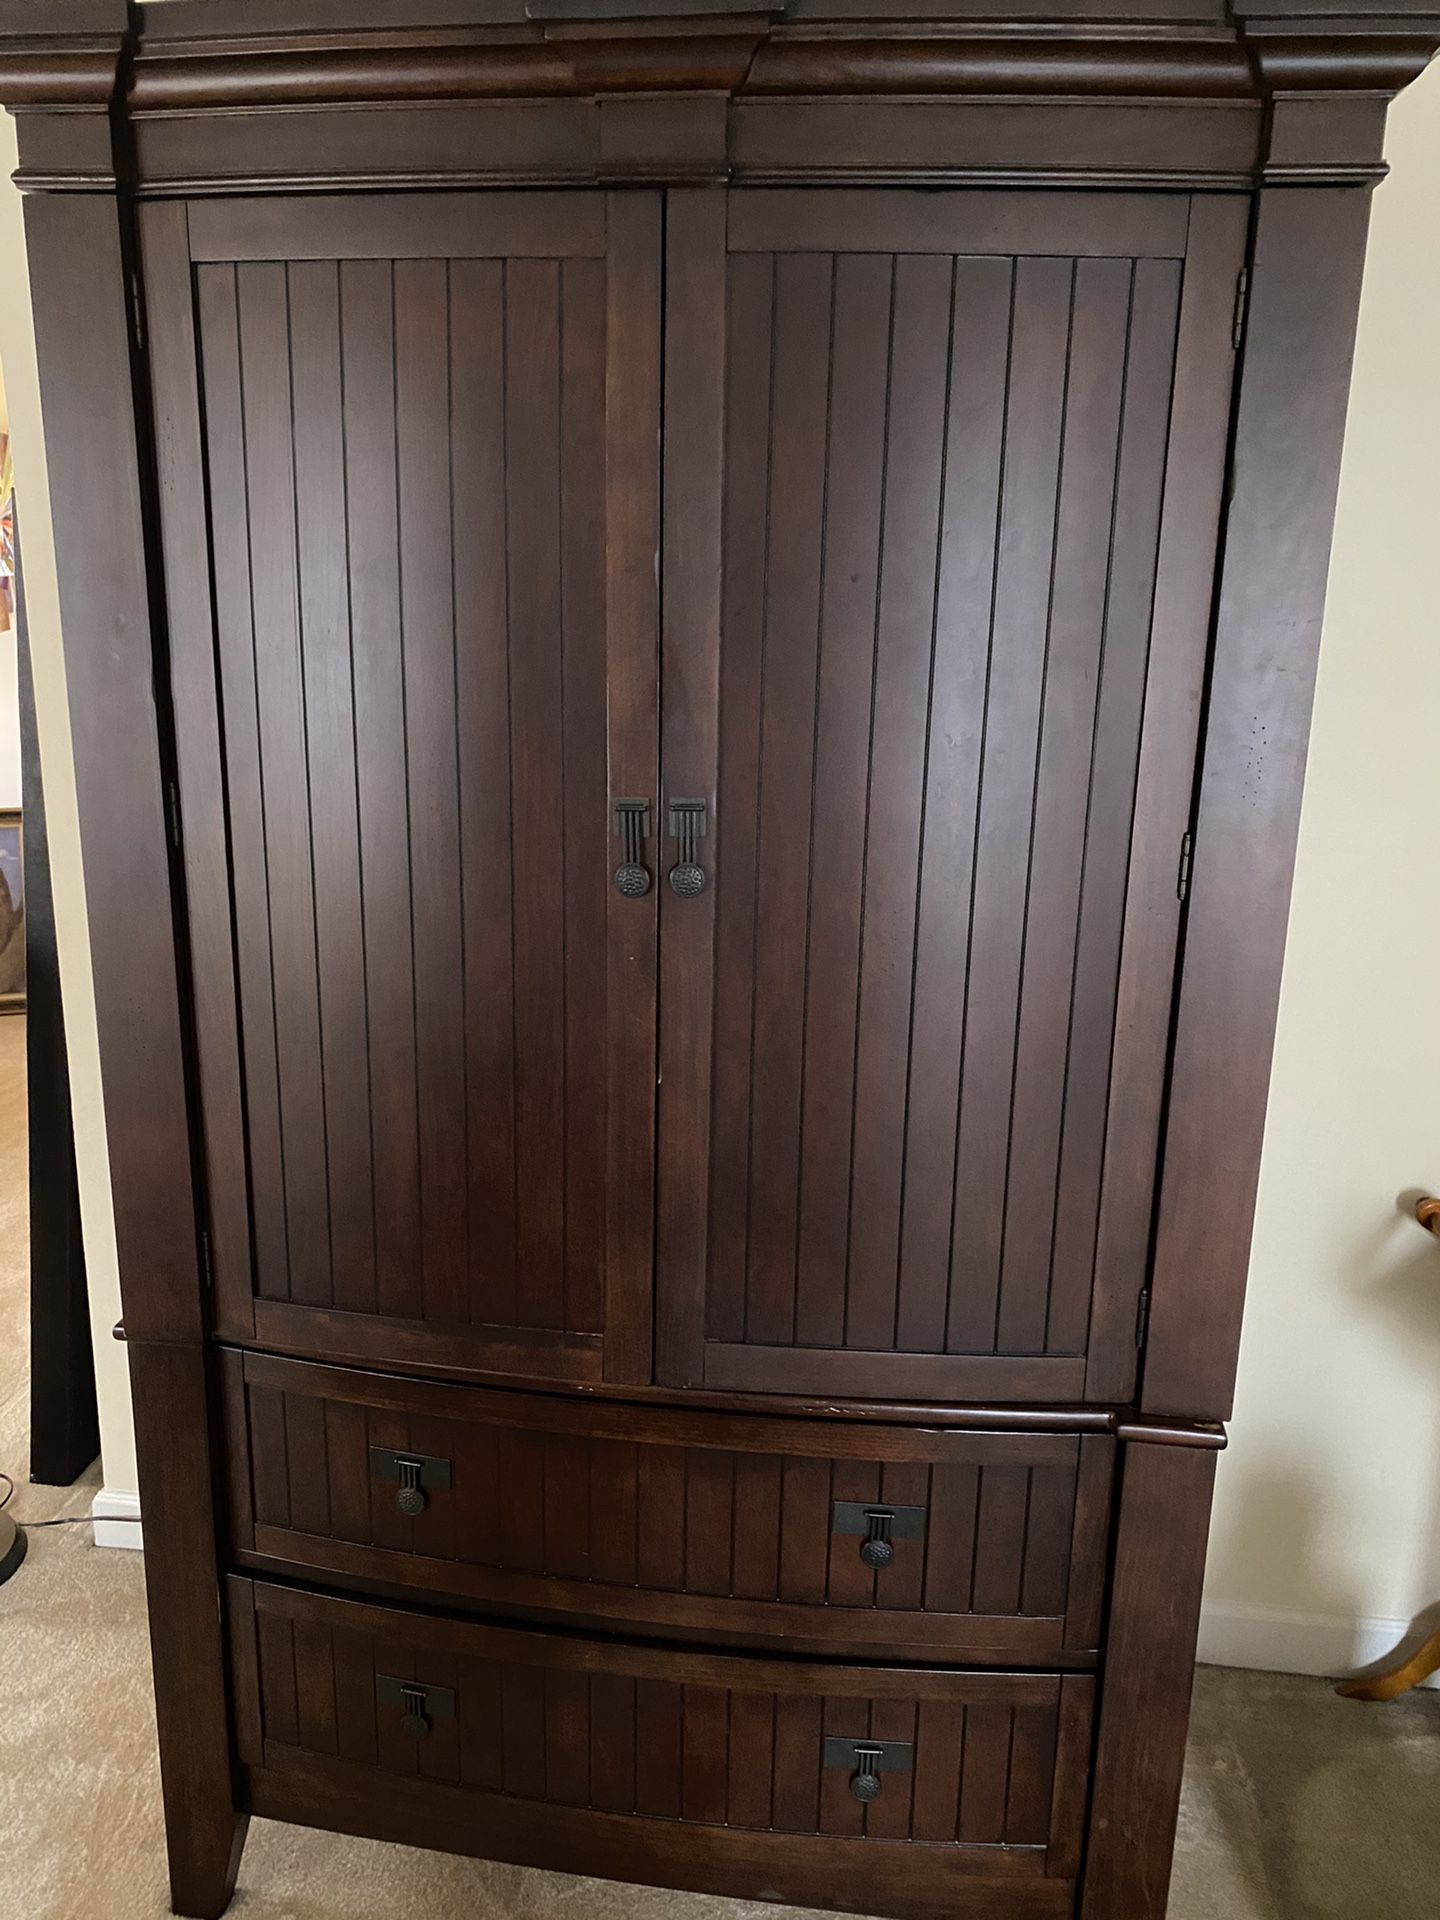 Ashley Furniture, Armoire, Mirror, Marble Top,Granite Dresser, 3700 retail. delivery incl